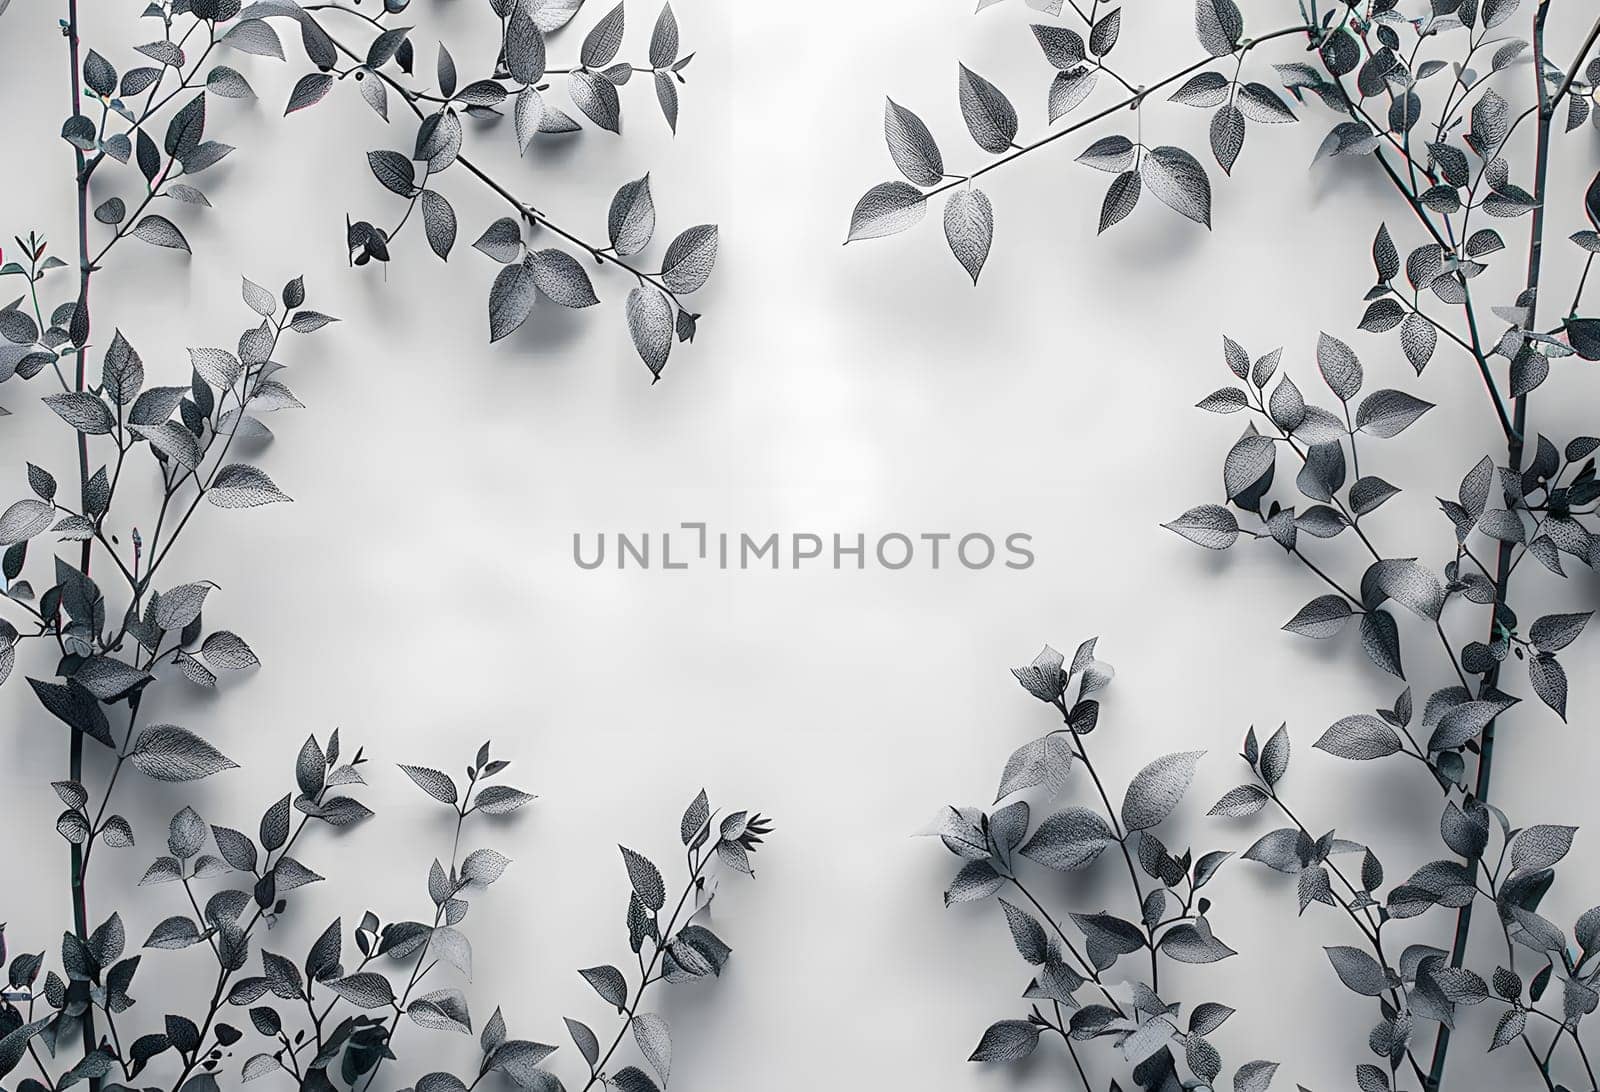 A monochrome photography of a plant with leaves on a white background, showcasing the natural landscape. The contrast of black and white creates a beautiful pattern